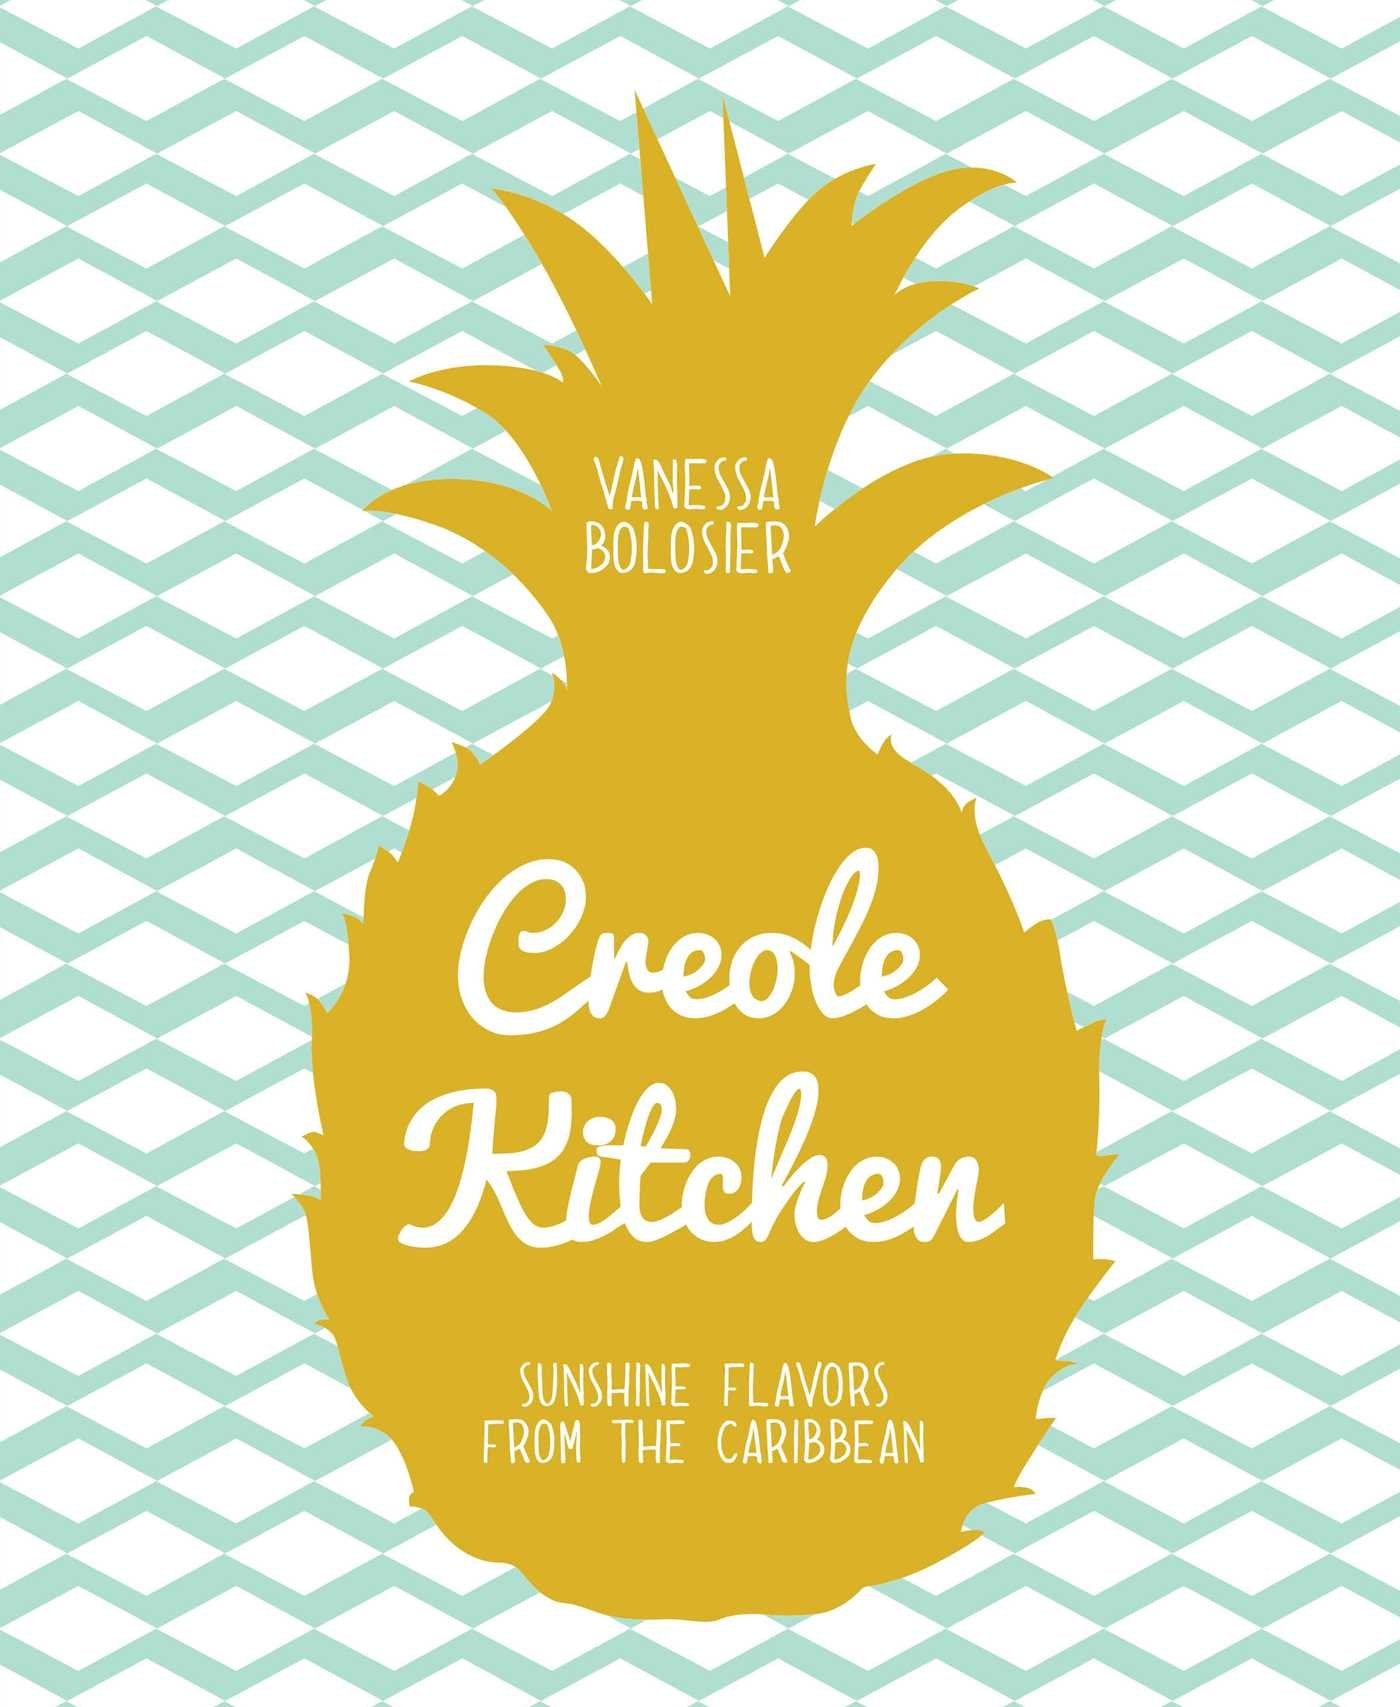 Creole Kitchen: Sunshine Flavors from the Caribbean (Vanessa Bolosier)